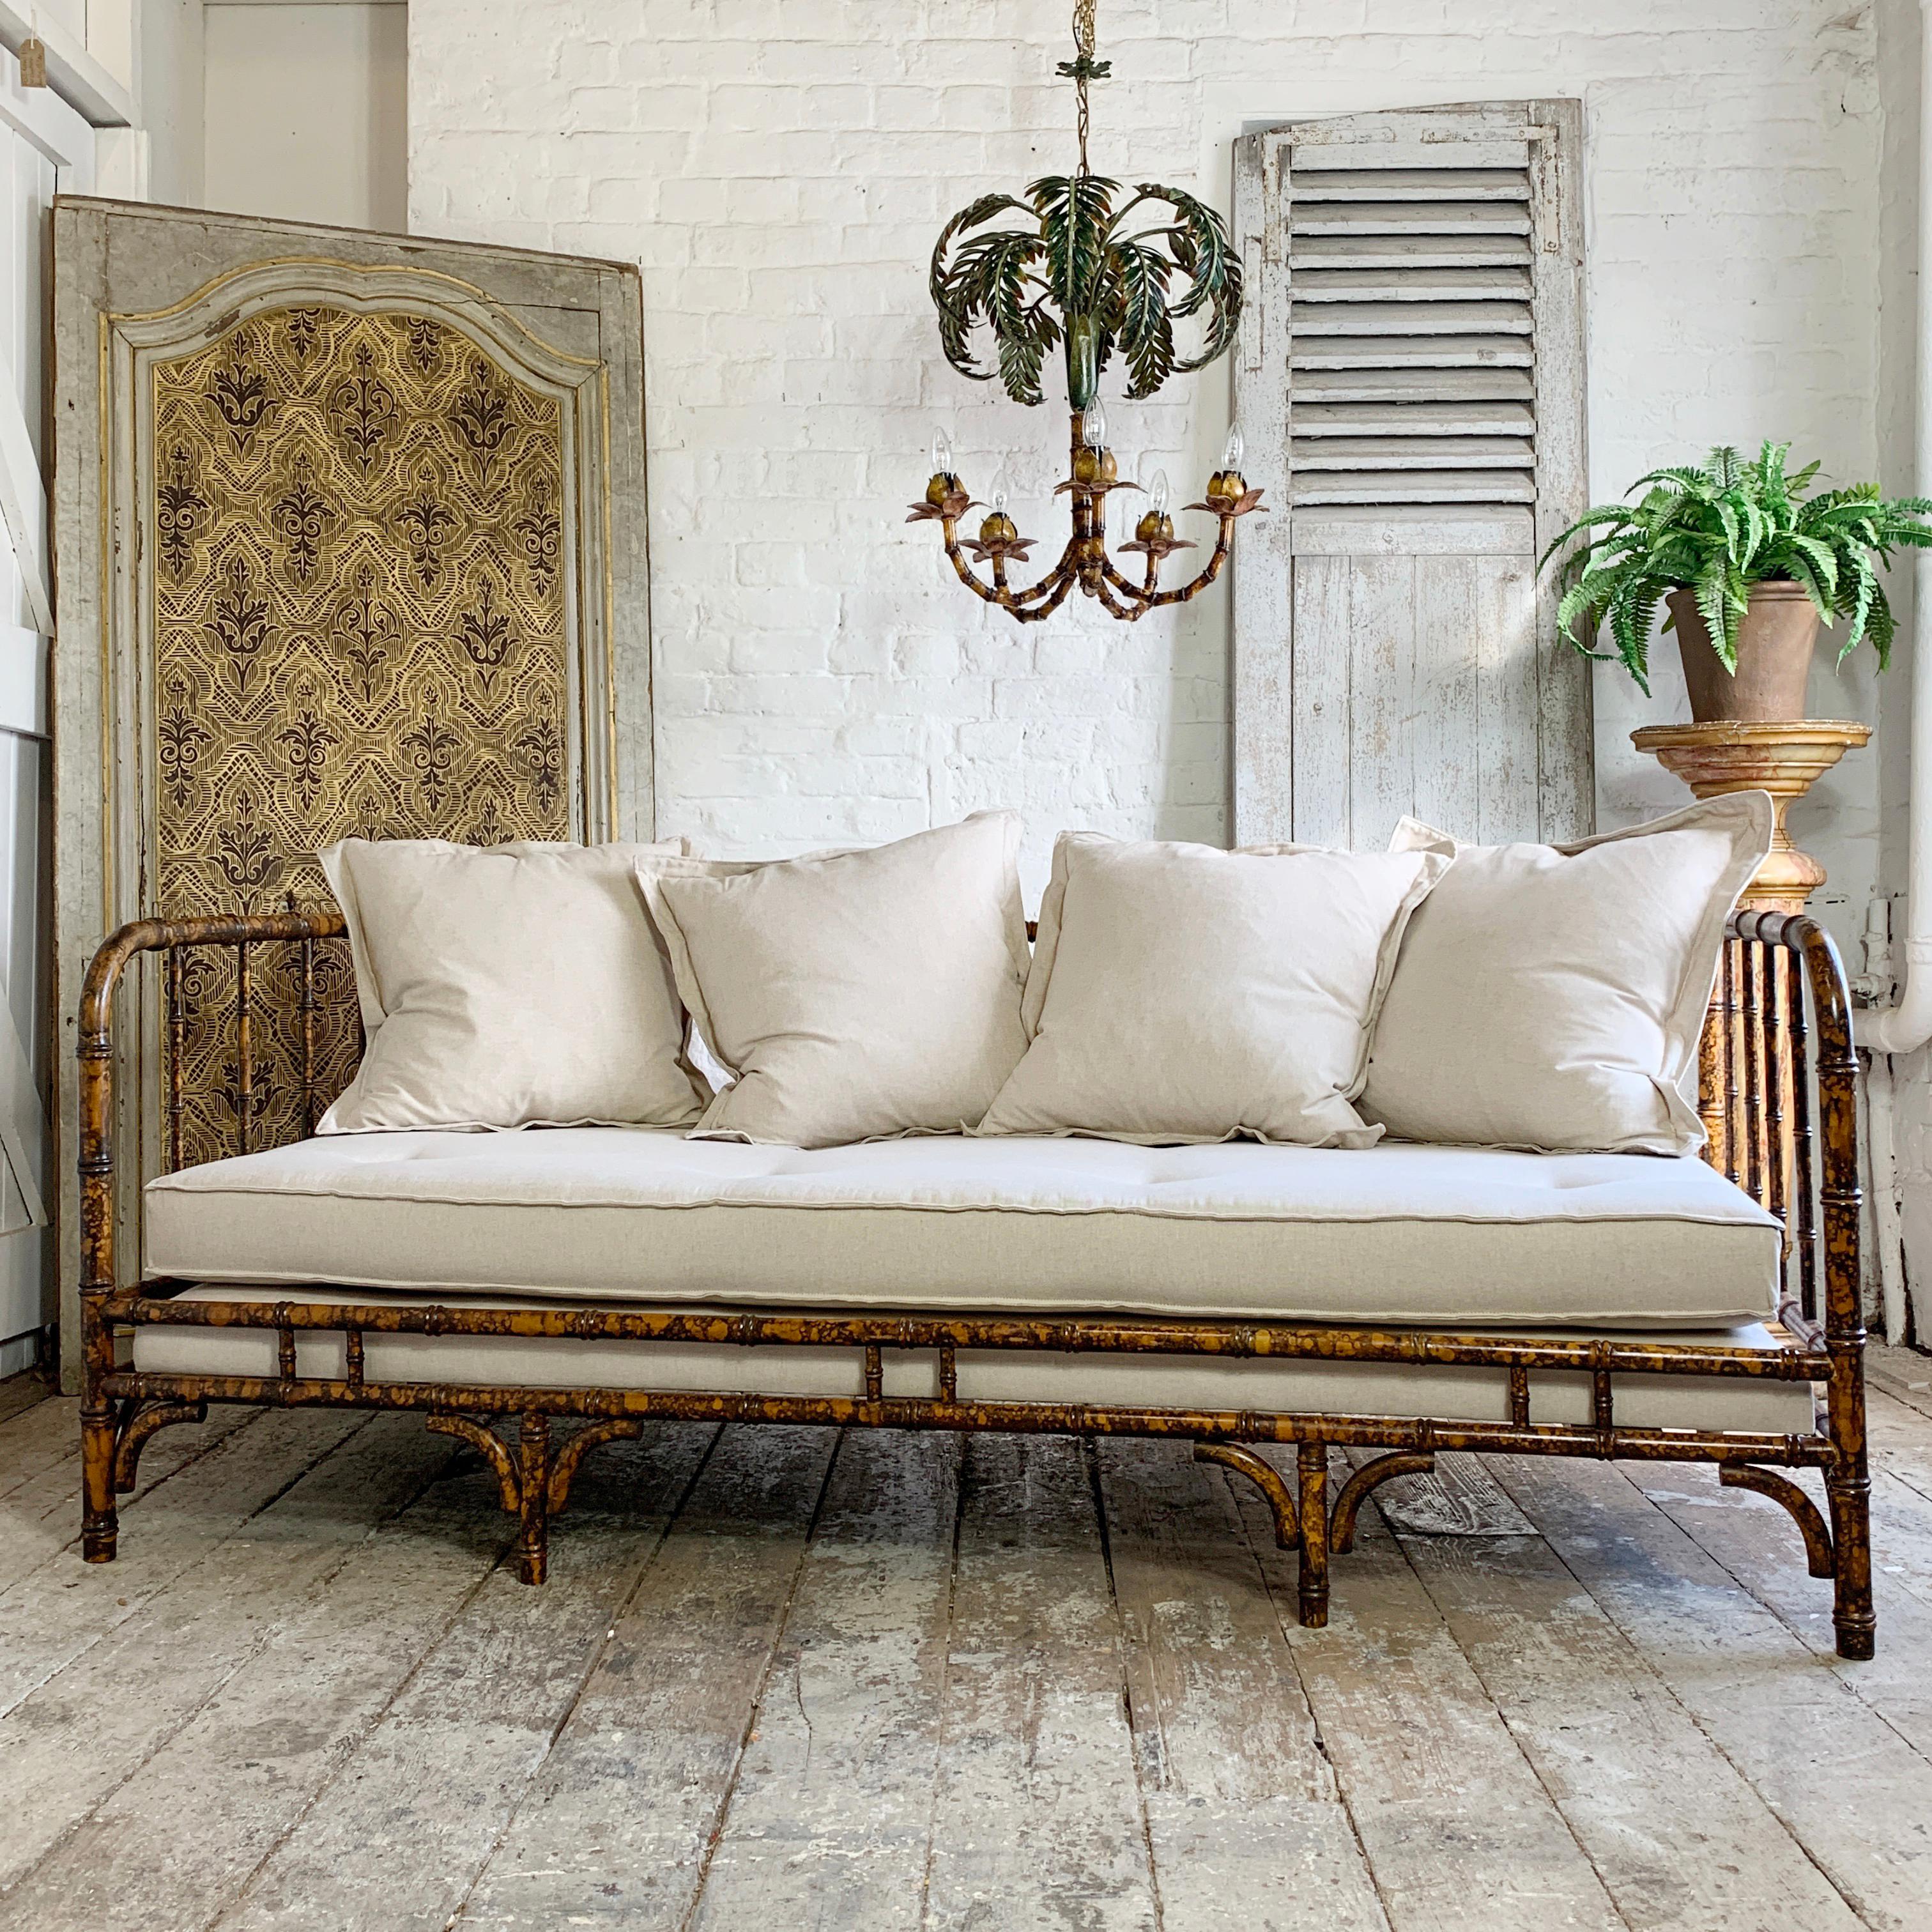 Beautiful Mid Century Faux Bamboo Daybed
This Daybed Was Originally In The Home Of The Artist 'Alfred Daniels'. We Were Lucky Enough To Obtain It Recently
Made By Acanto, Spain, C 1950'S / 70'S
This Beautiful Wooden Faux Bamboo Daybed Is Decorated